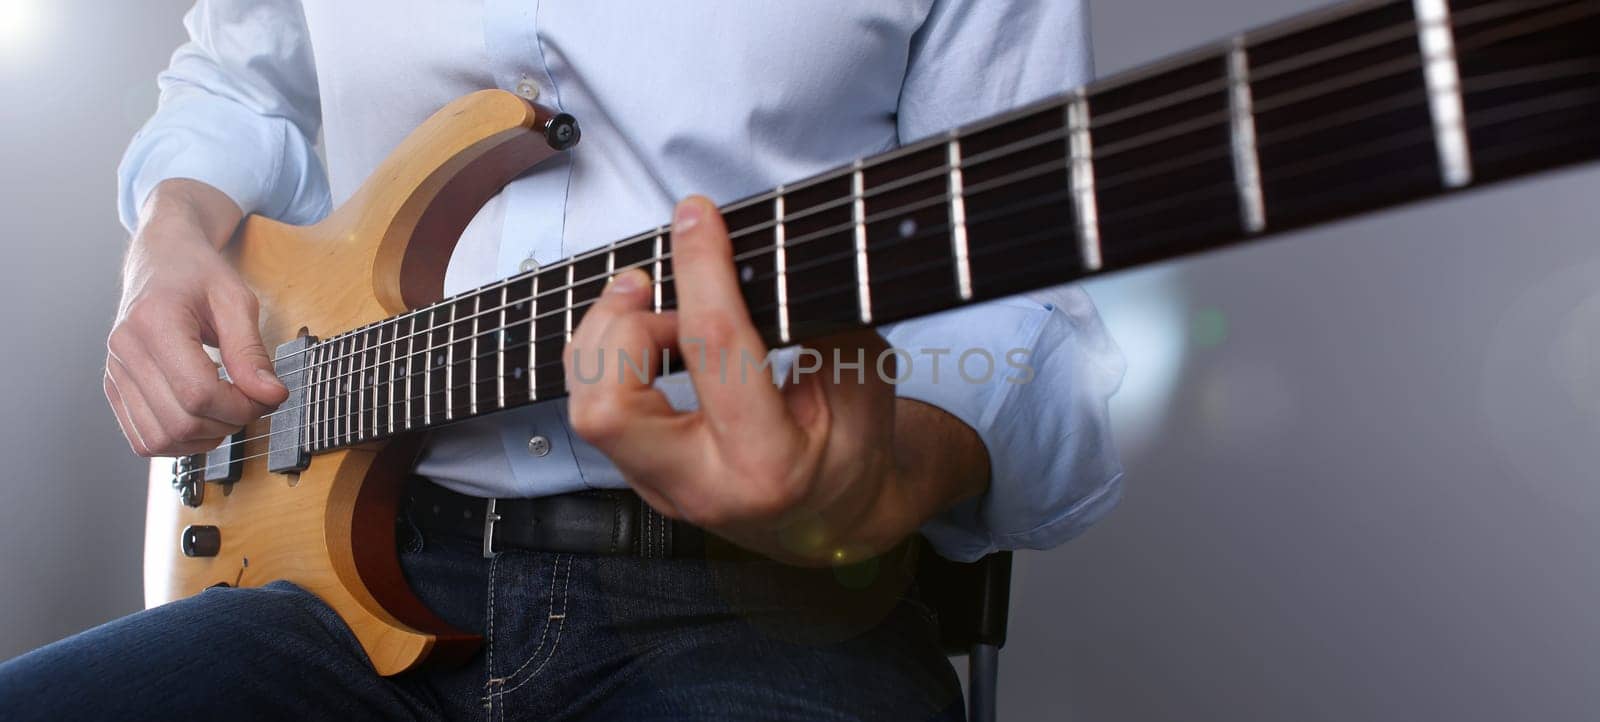 Male arms holding and playing classic shape wooden electric guitar closeup. Six stringed learning musical school education art leisure electrical vintage stage shop having fun enjoying hobby concept